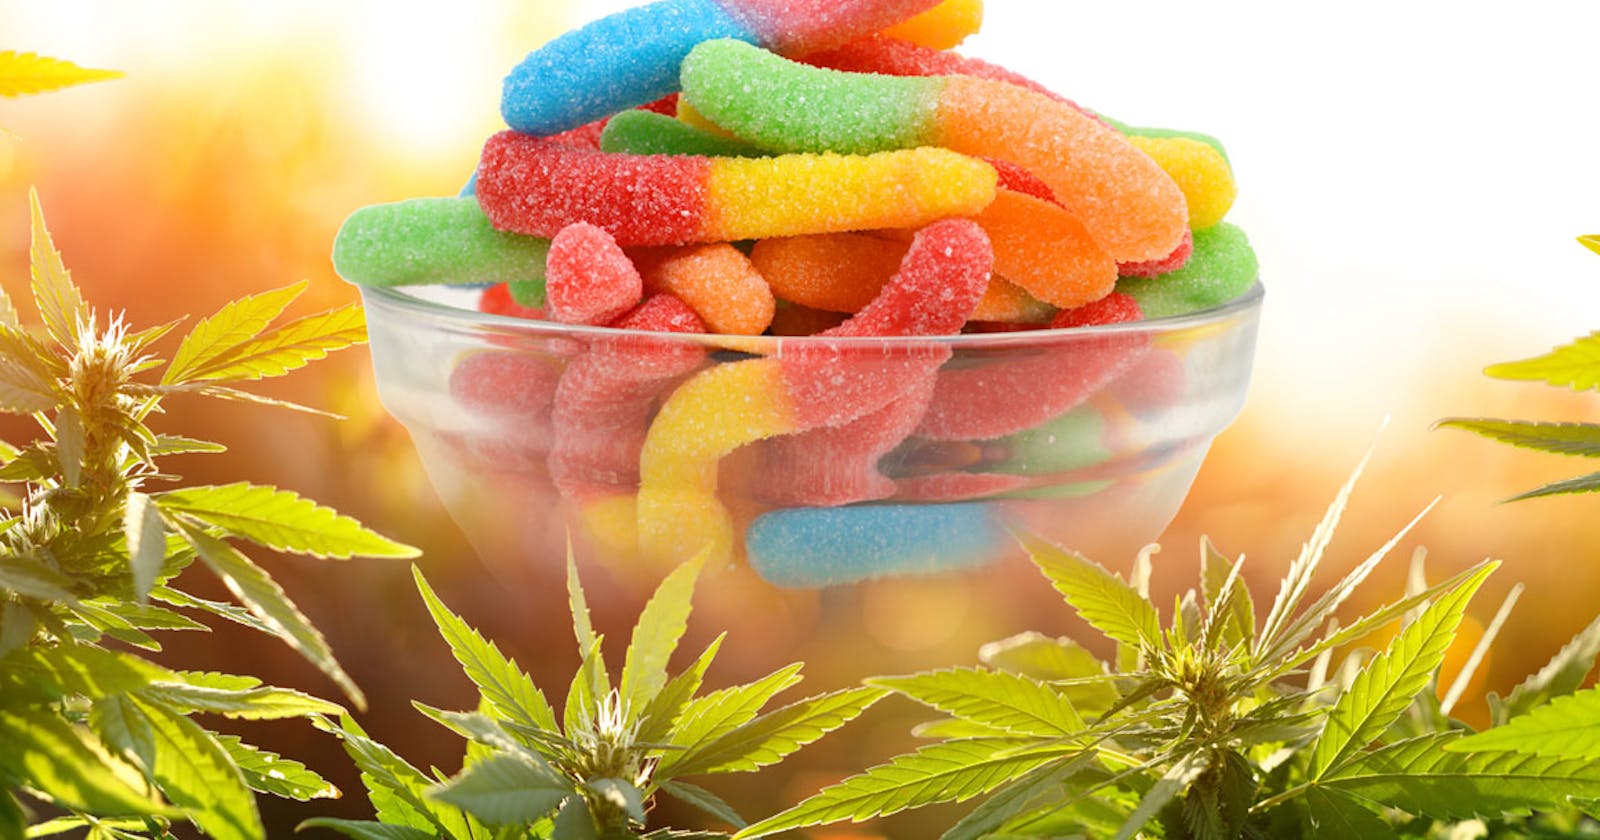 United Farms CBD Gummies THE MOST POPULAR CBD GUMMY BEARS IN UNITED STATESREAD HERE REVIEWS, BENEFITS, SIDE EFFECT, INGREDIENTS, DOES IT REALLY WORK?